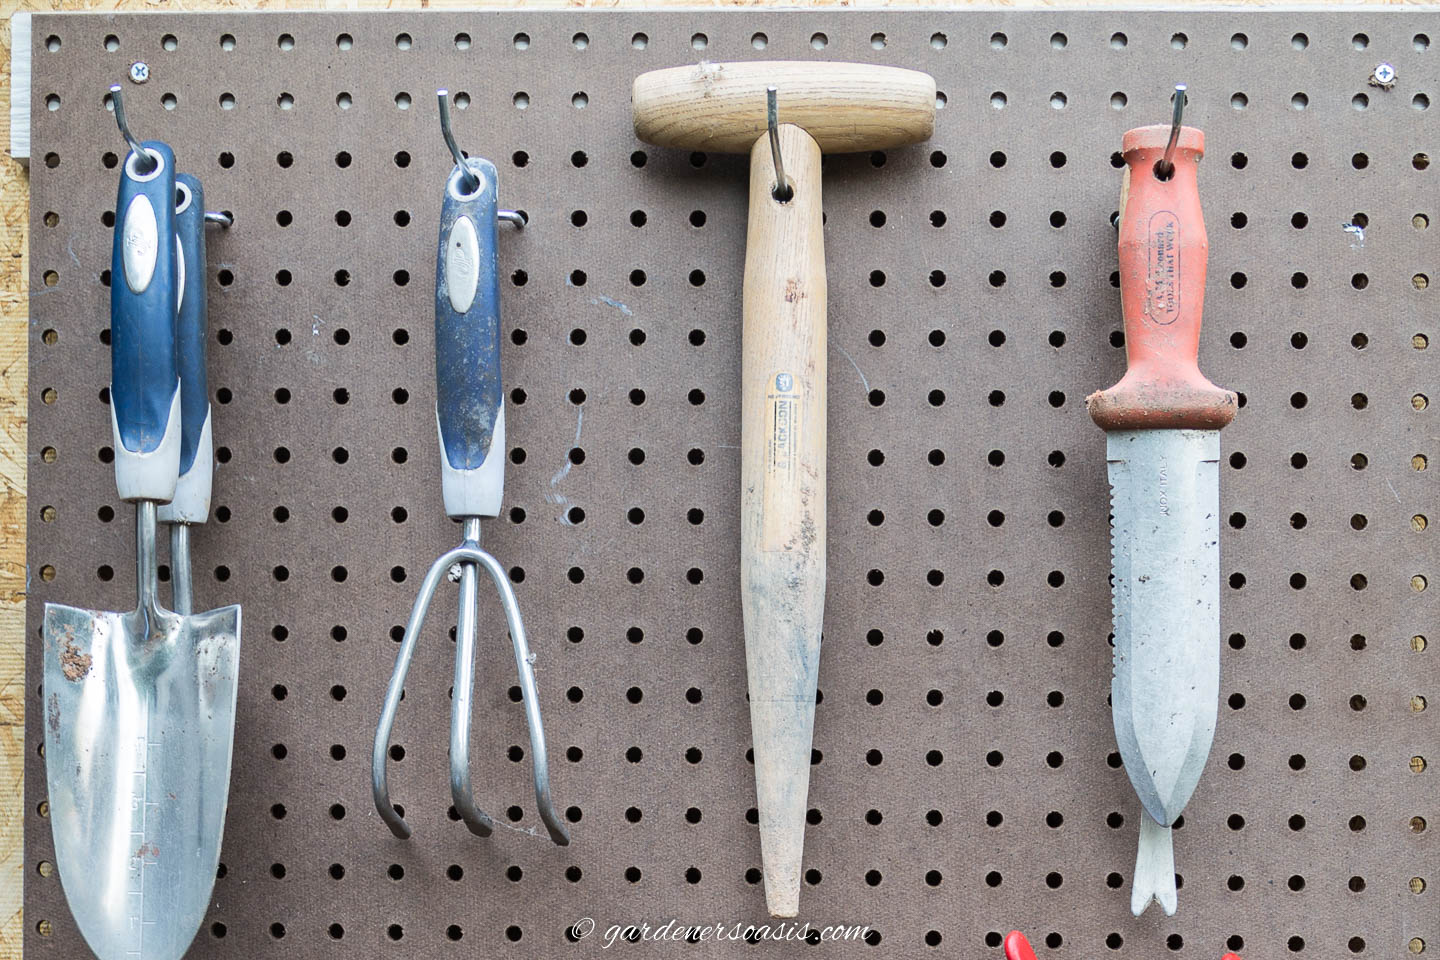 garden hand tools with holes in the handles hung on pegboard with straight hooks